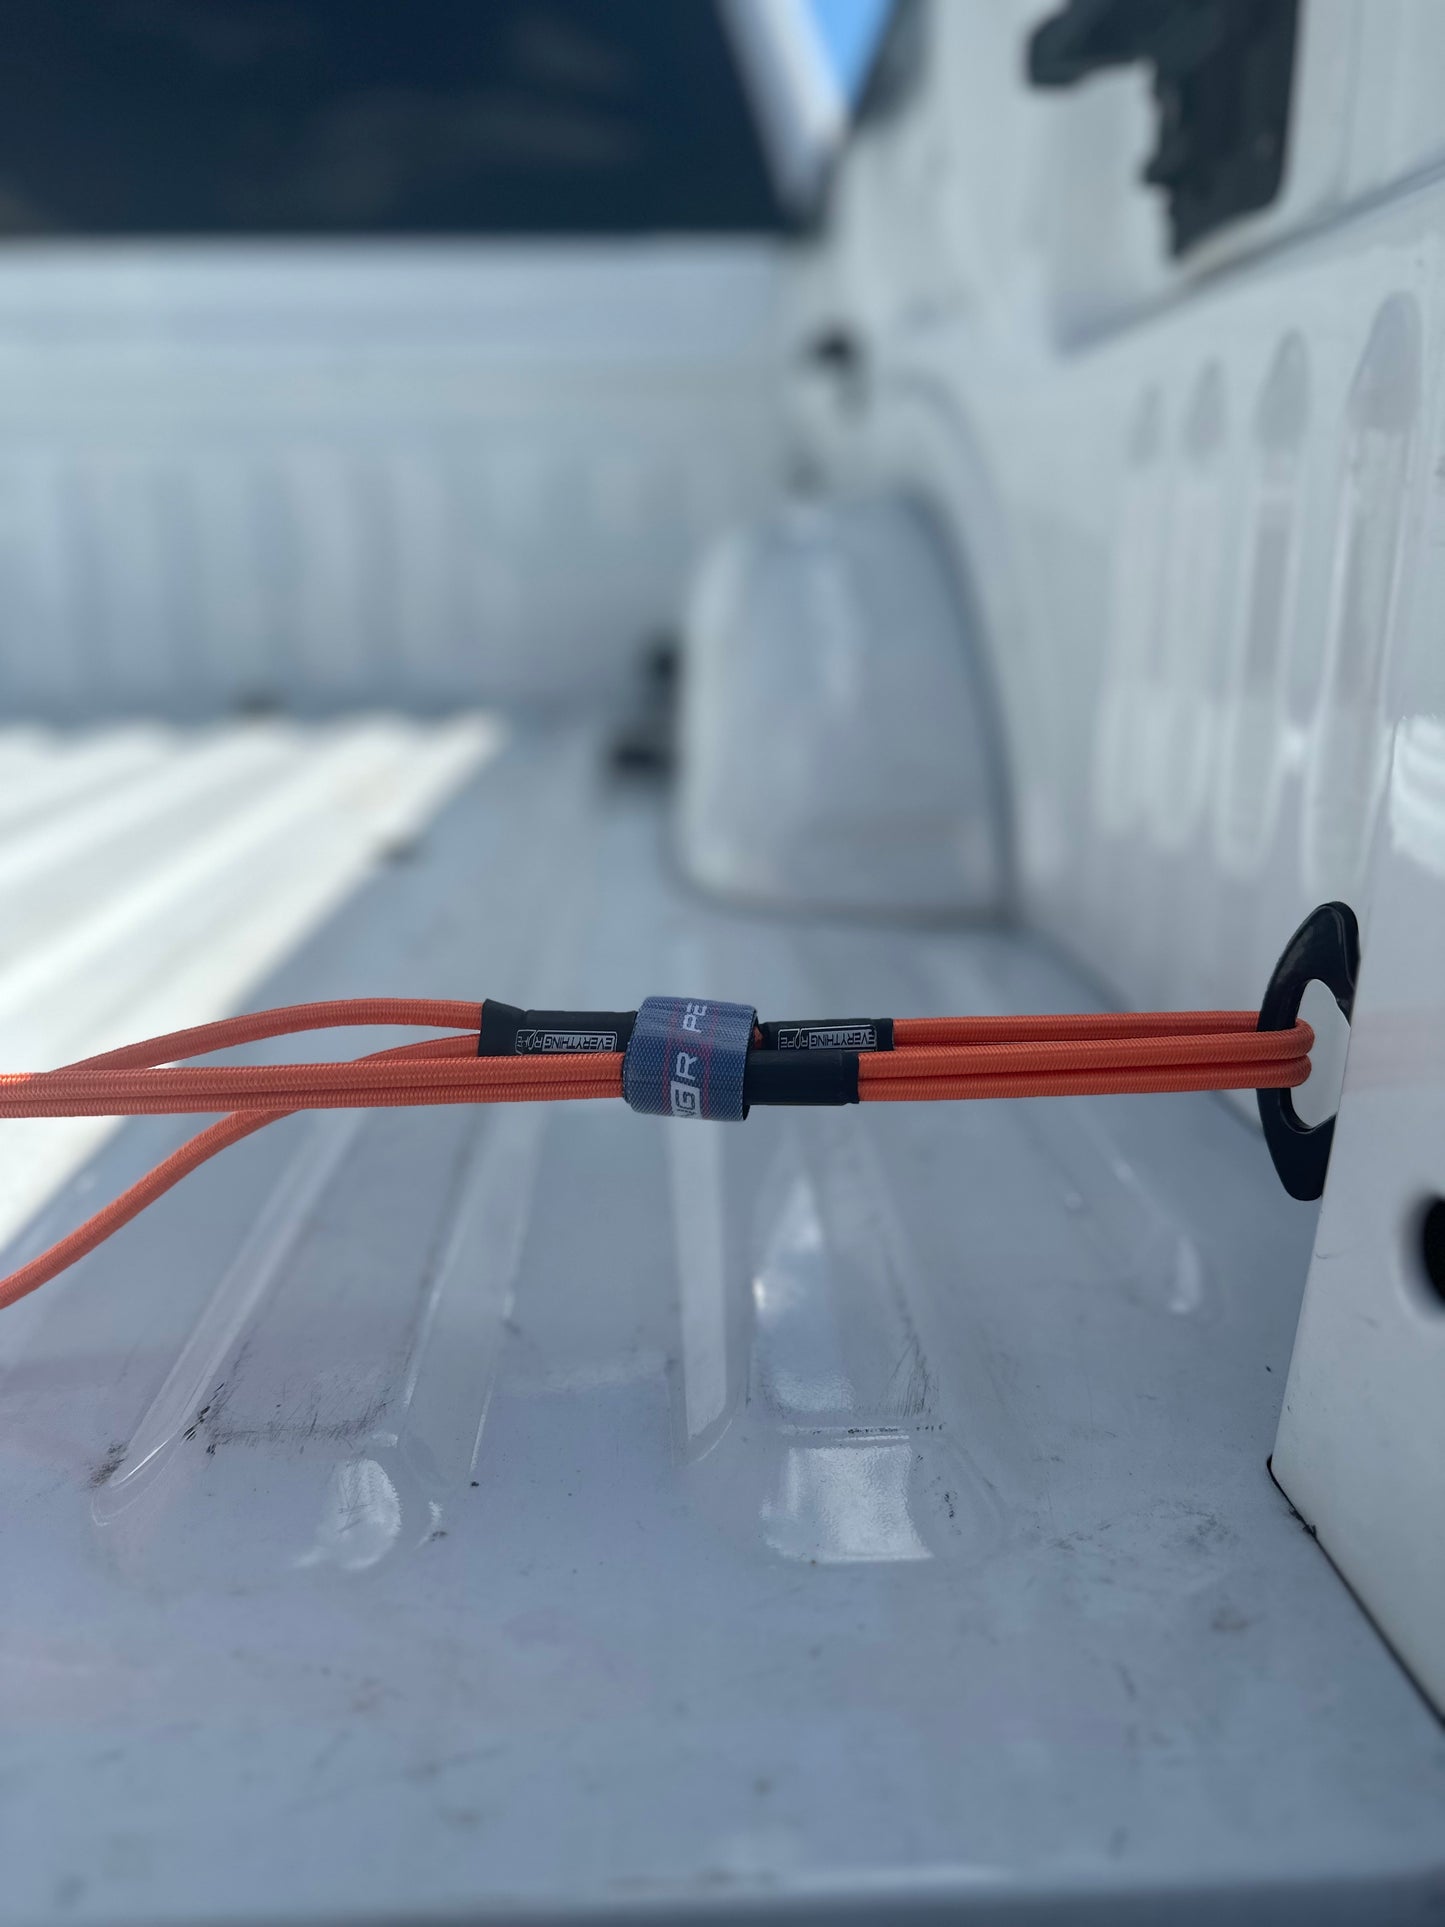 Everything Rope Multi Use Bungee Cord, These 5' Adjustable Bungee Cords are the last tie down you will ever need. Always the perfect length.